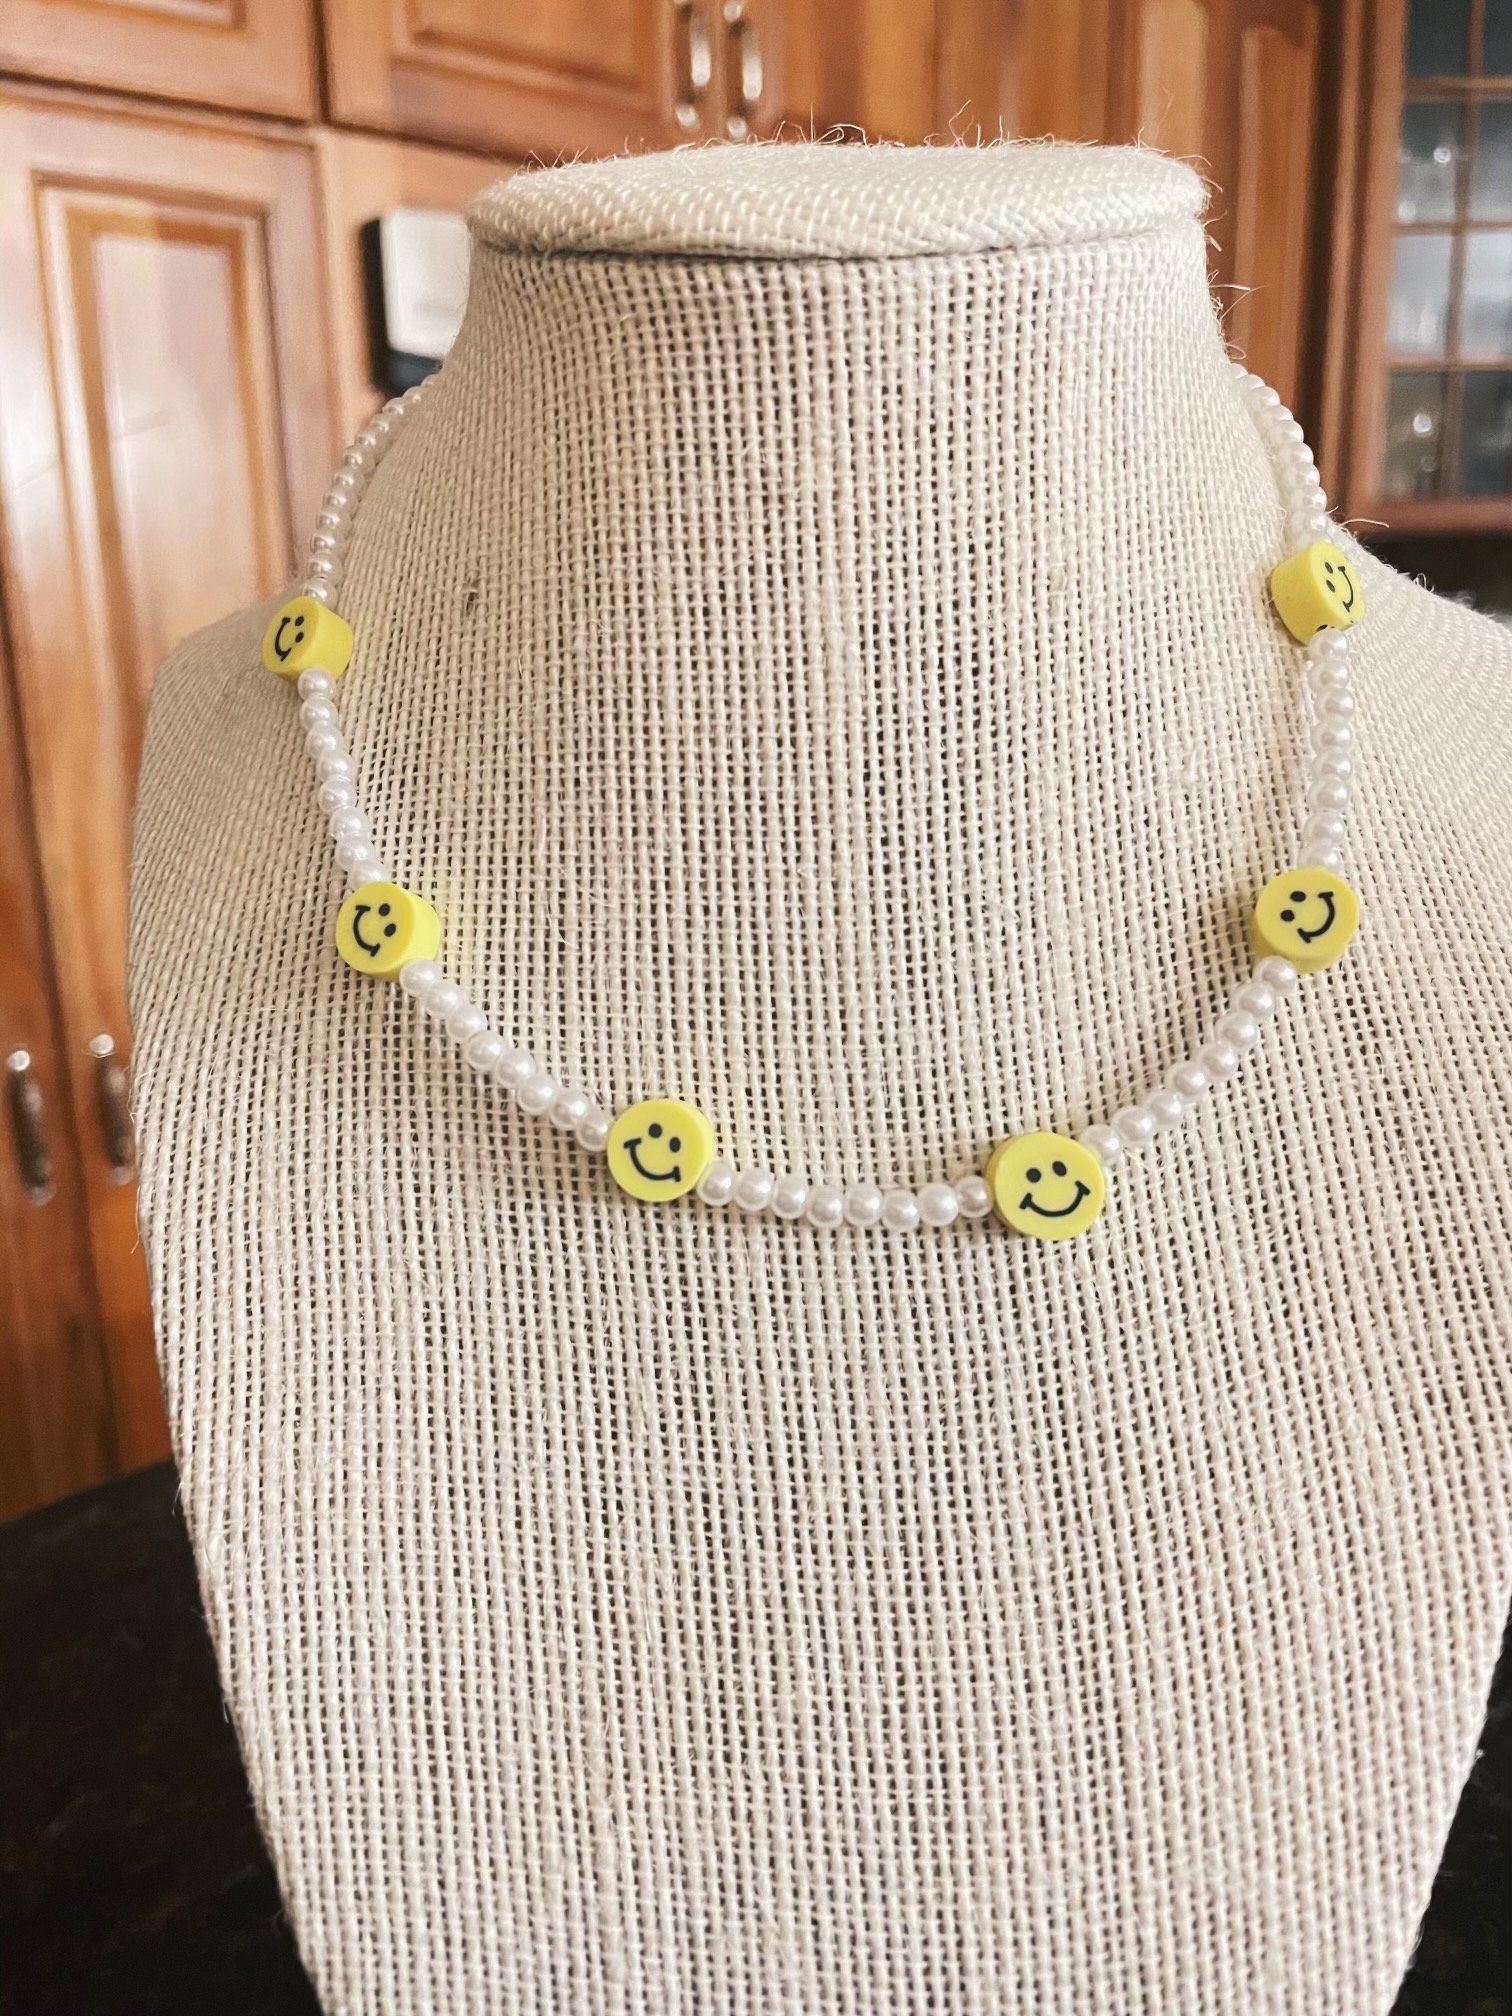 Image of smiley face jewelry